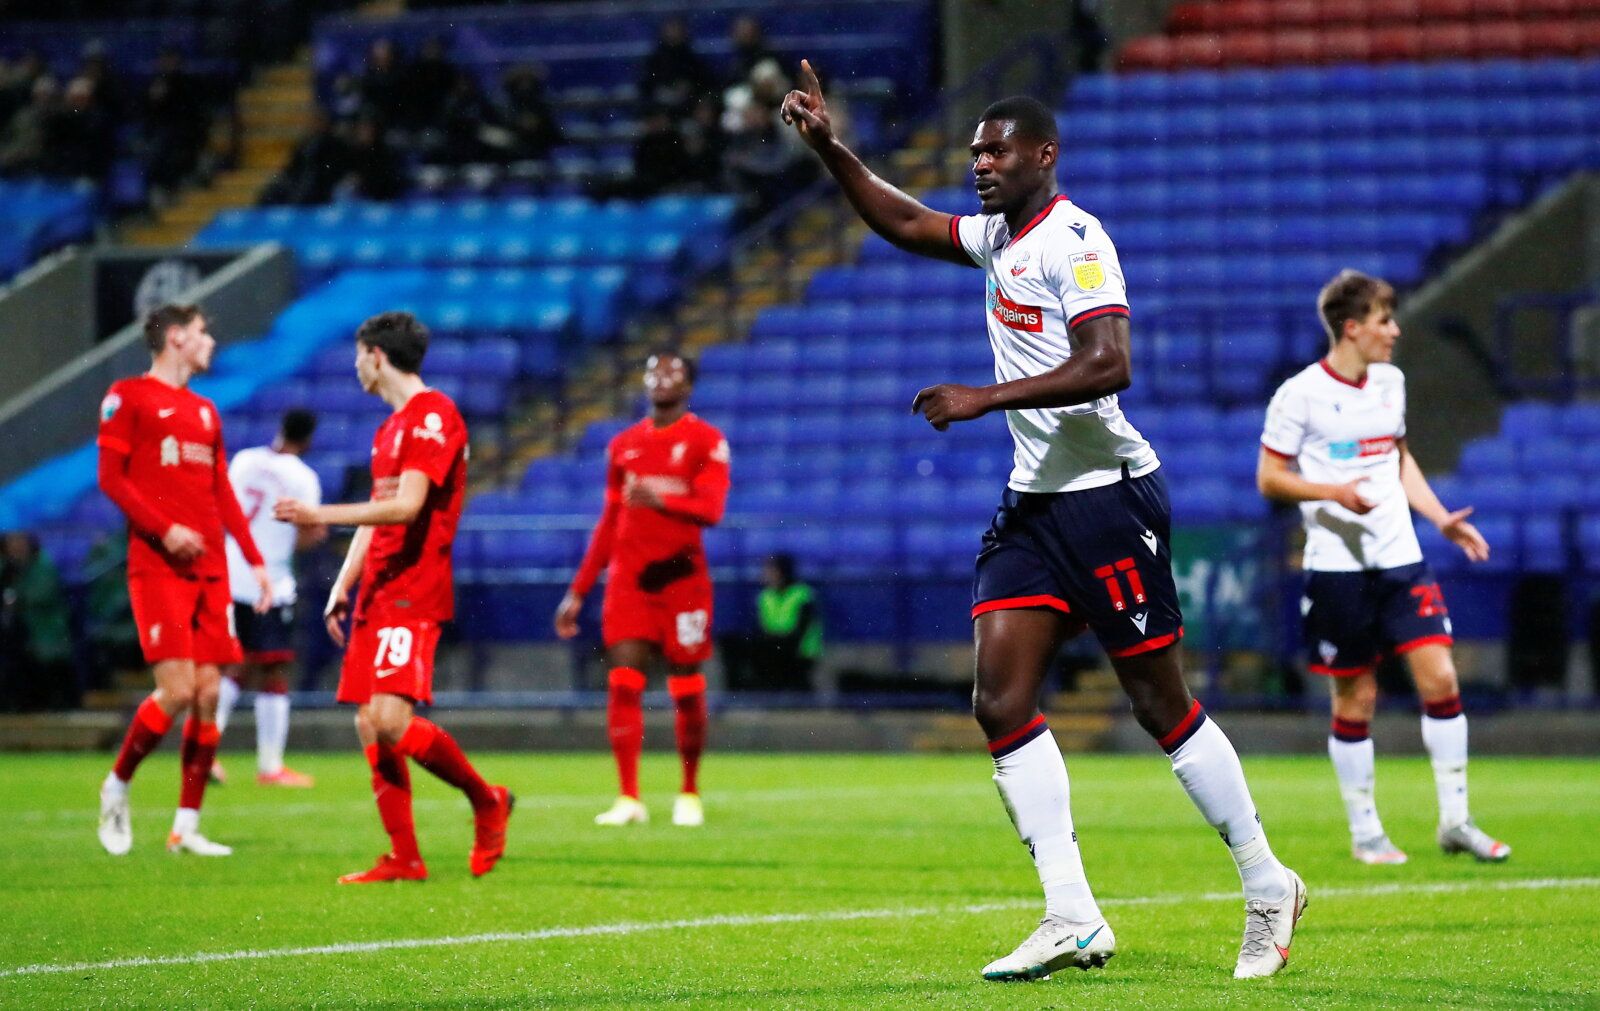 Soccer Football - EFL Trophy - Group Stage - Bolton Wanderers v Liverpool U21 - University of Bolton Stadium, Bolton, Britain - October 5, 2021  Bolton Wanderers' Amadou Bakayoko celebrates scoring their second goal   Action Images/Jason Cairnduff  EDITORIAL USE ONLY. No use with unauthorized audio, video, data, fixture lists, club/league logos or 